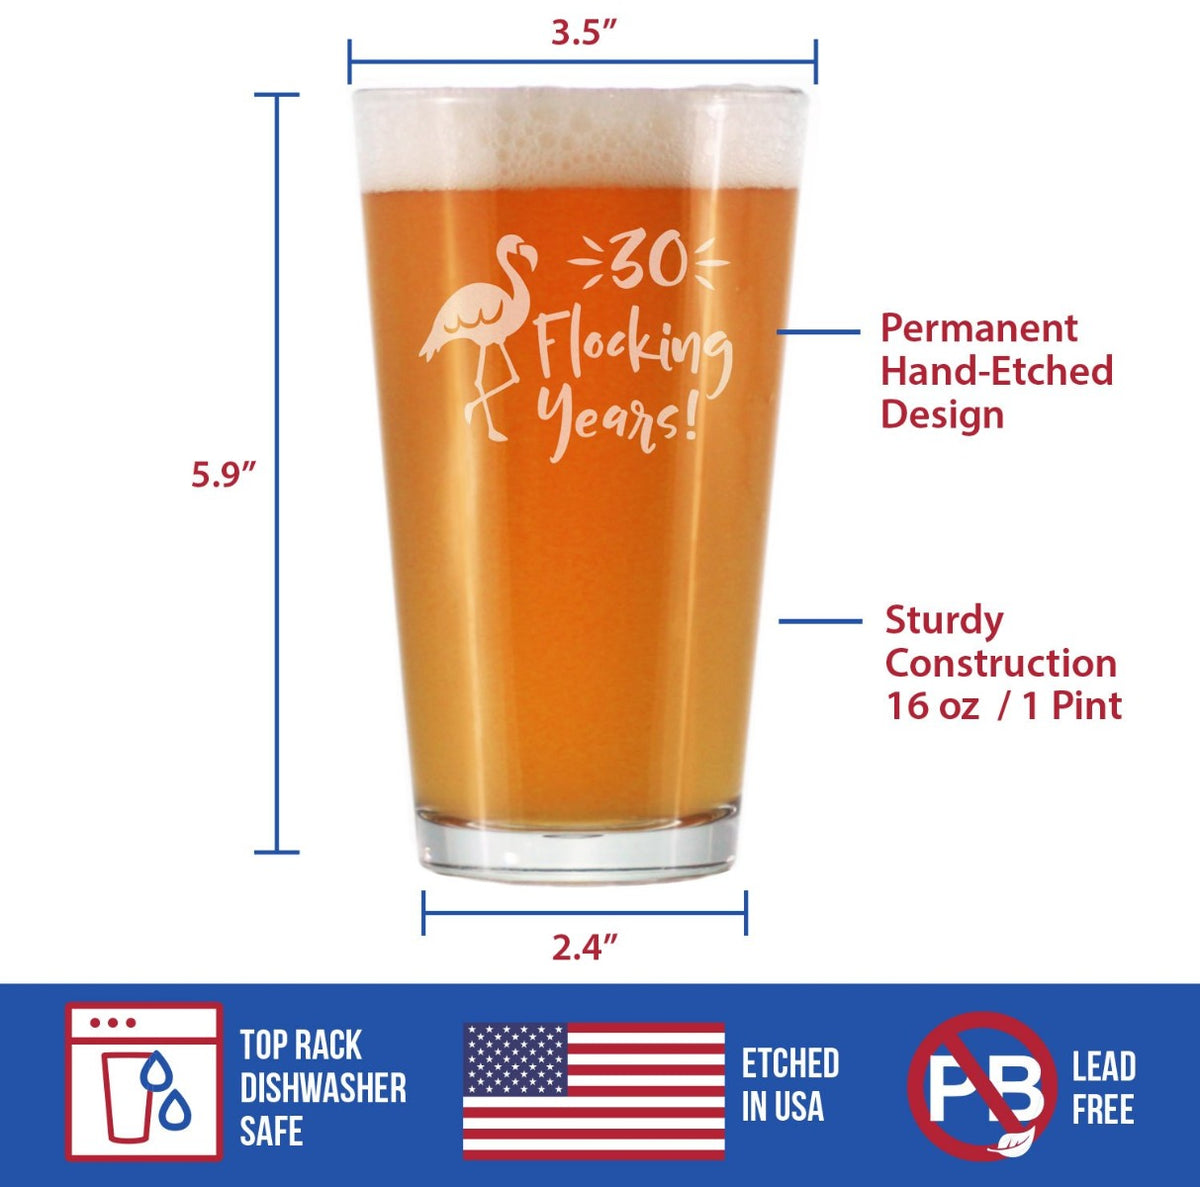 30 Flocking Years - 16 Ounce Pint Glass